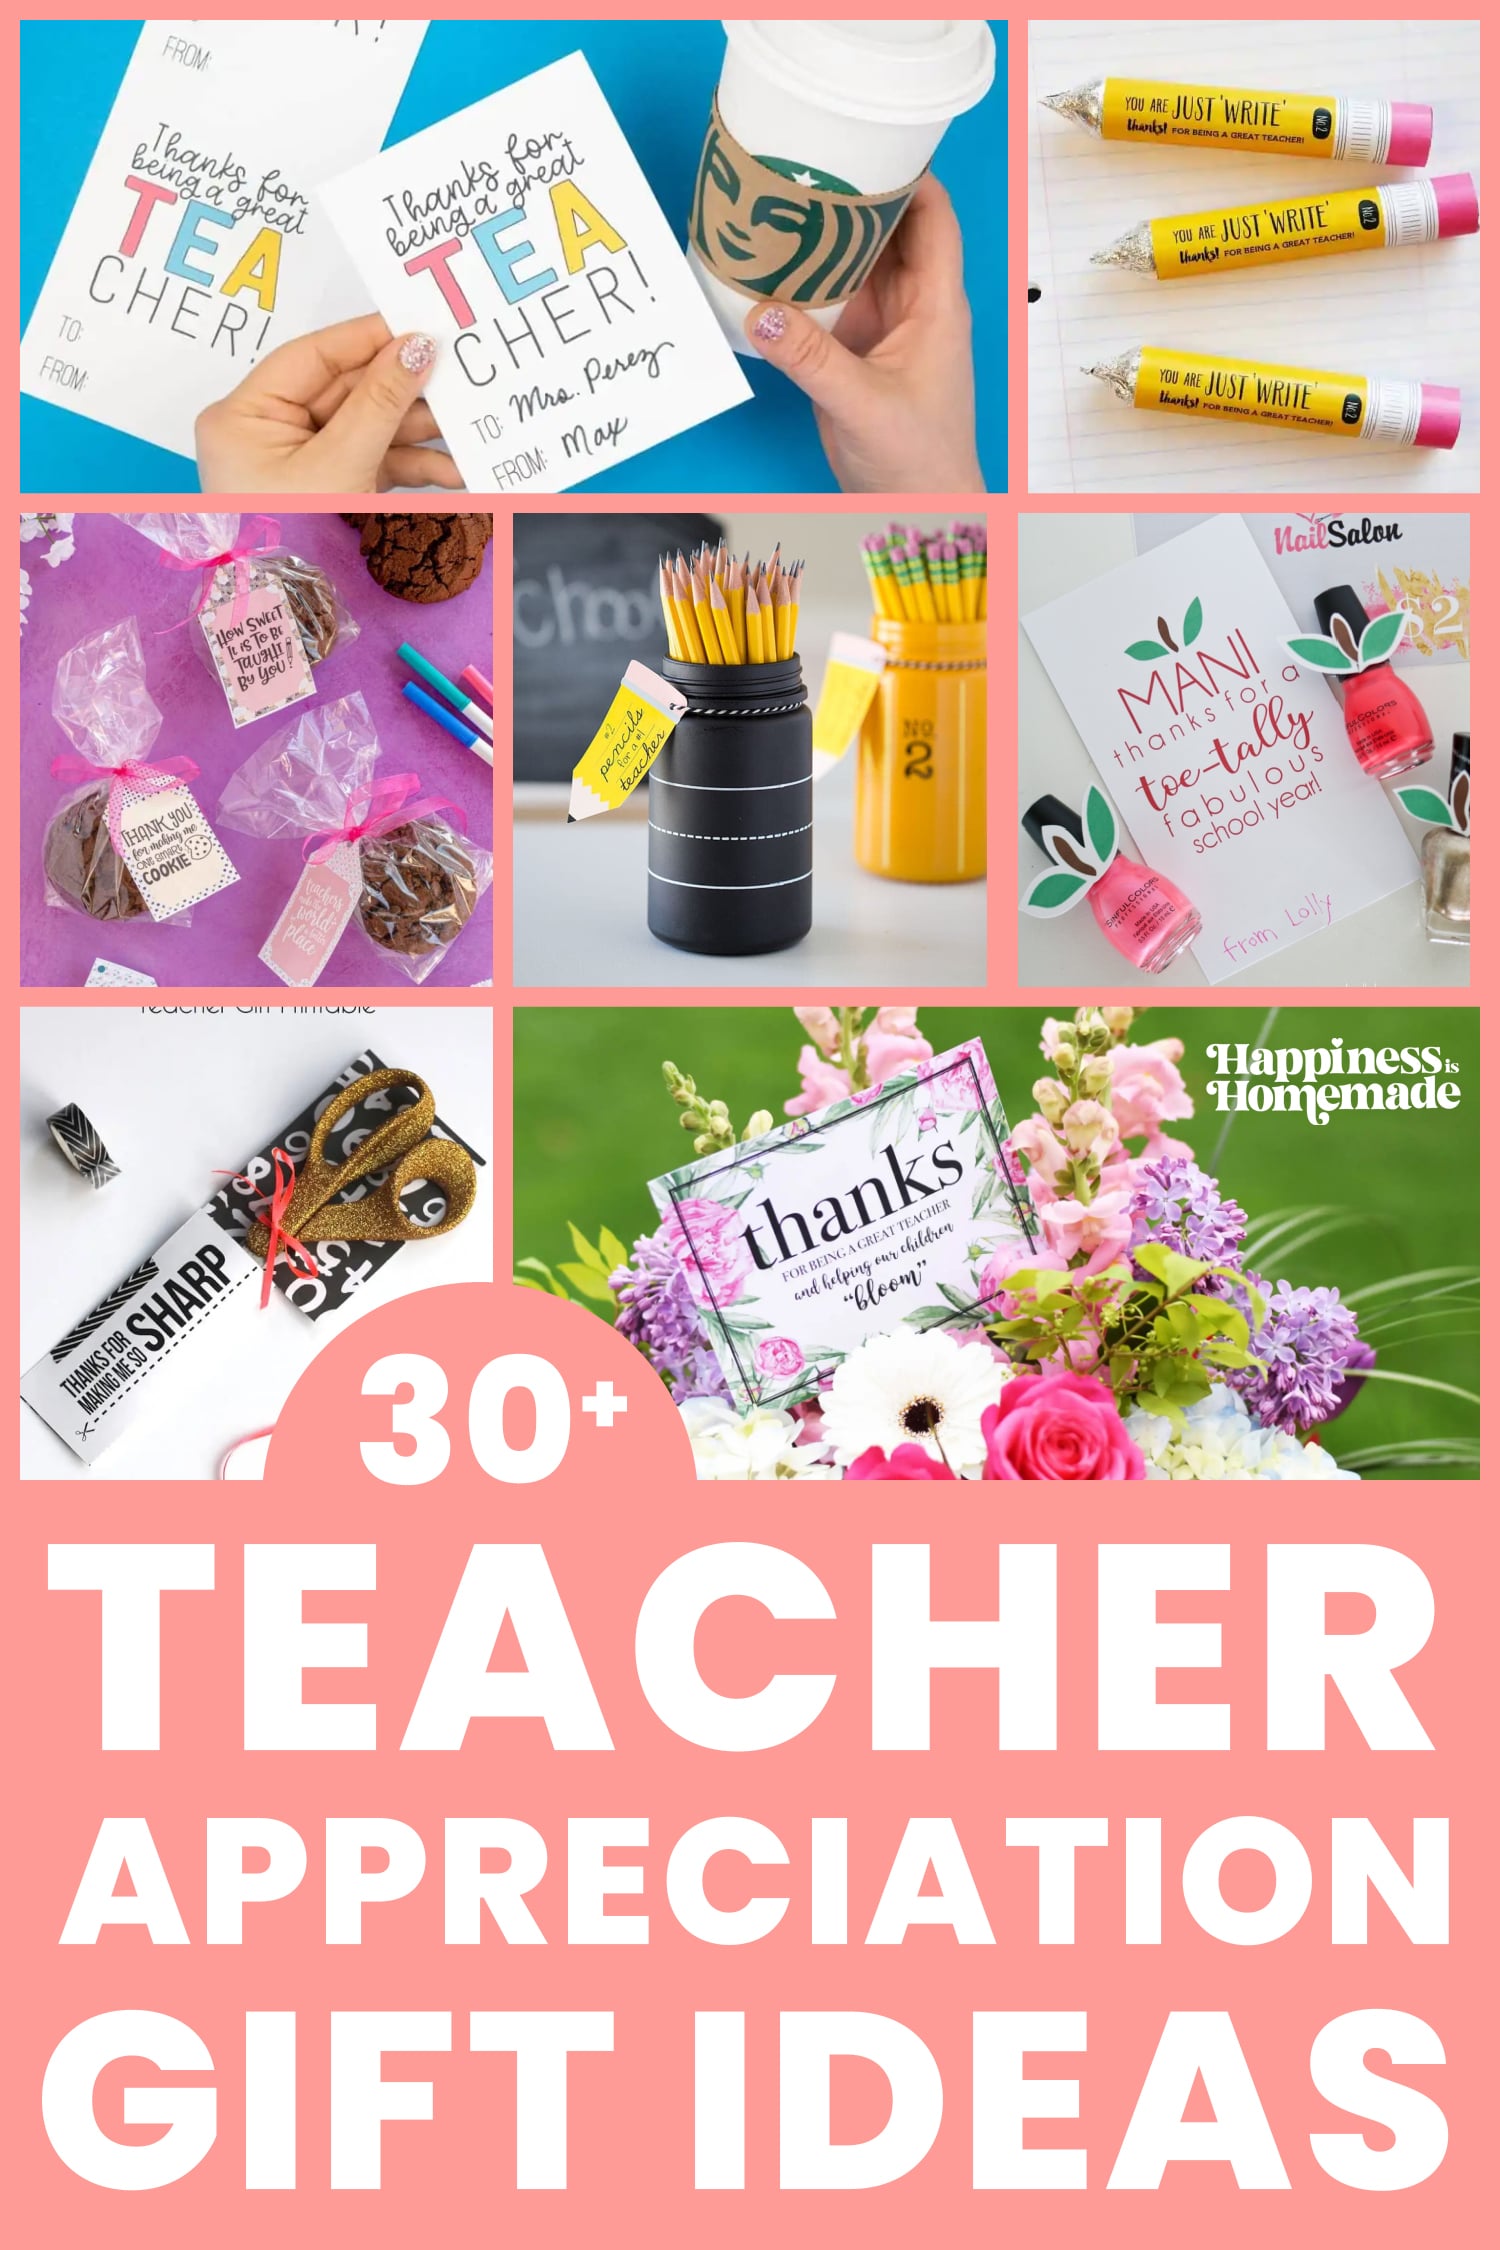 Best teacher gifts to celebrate the end of term | The Independent